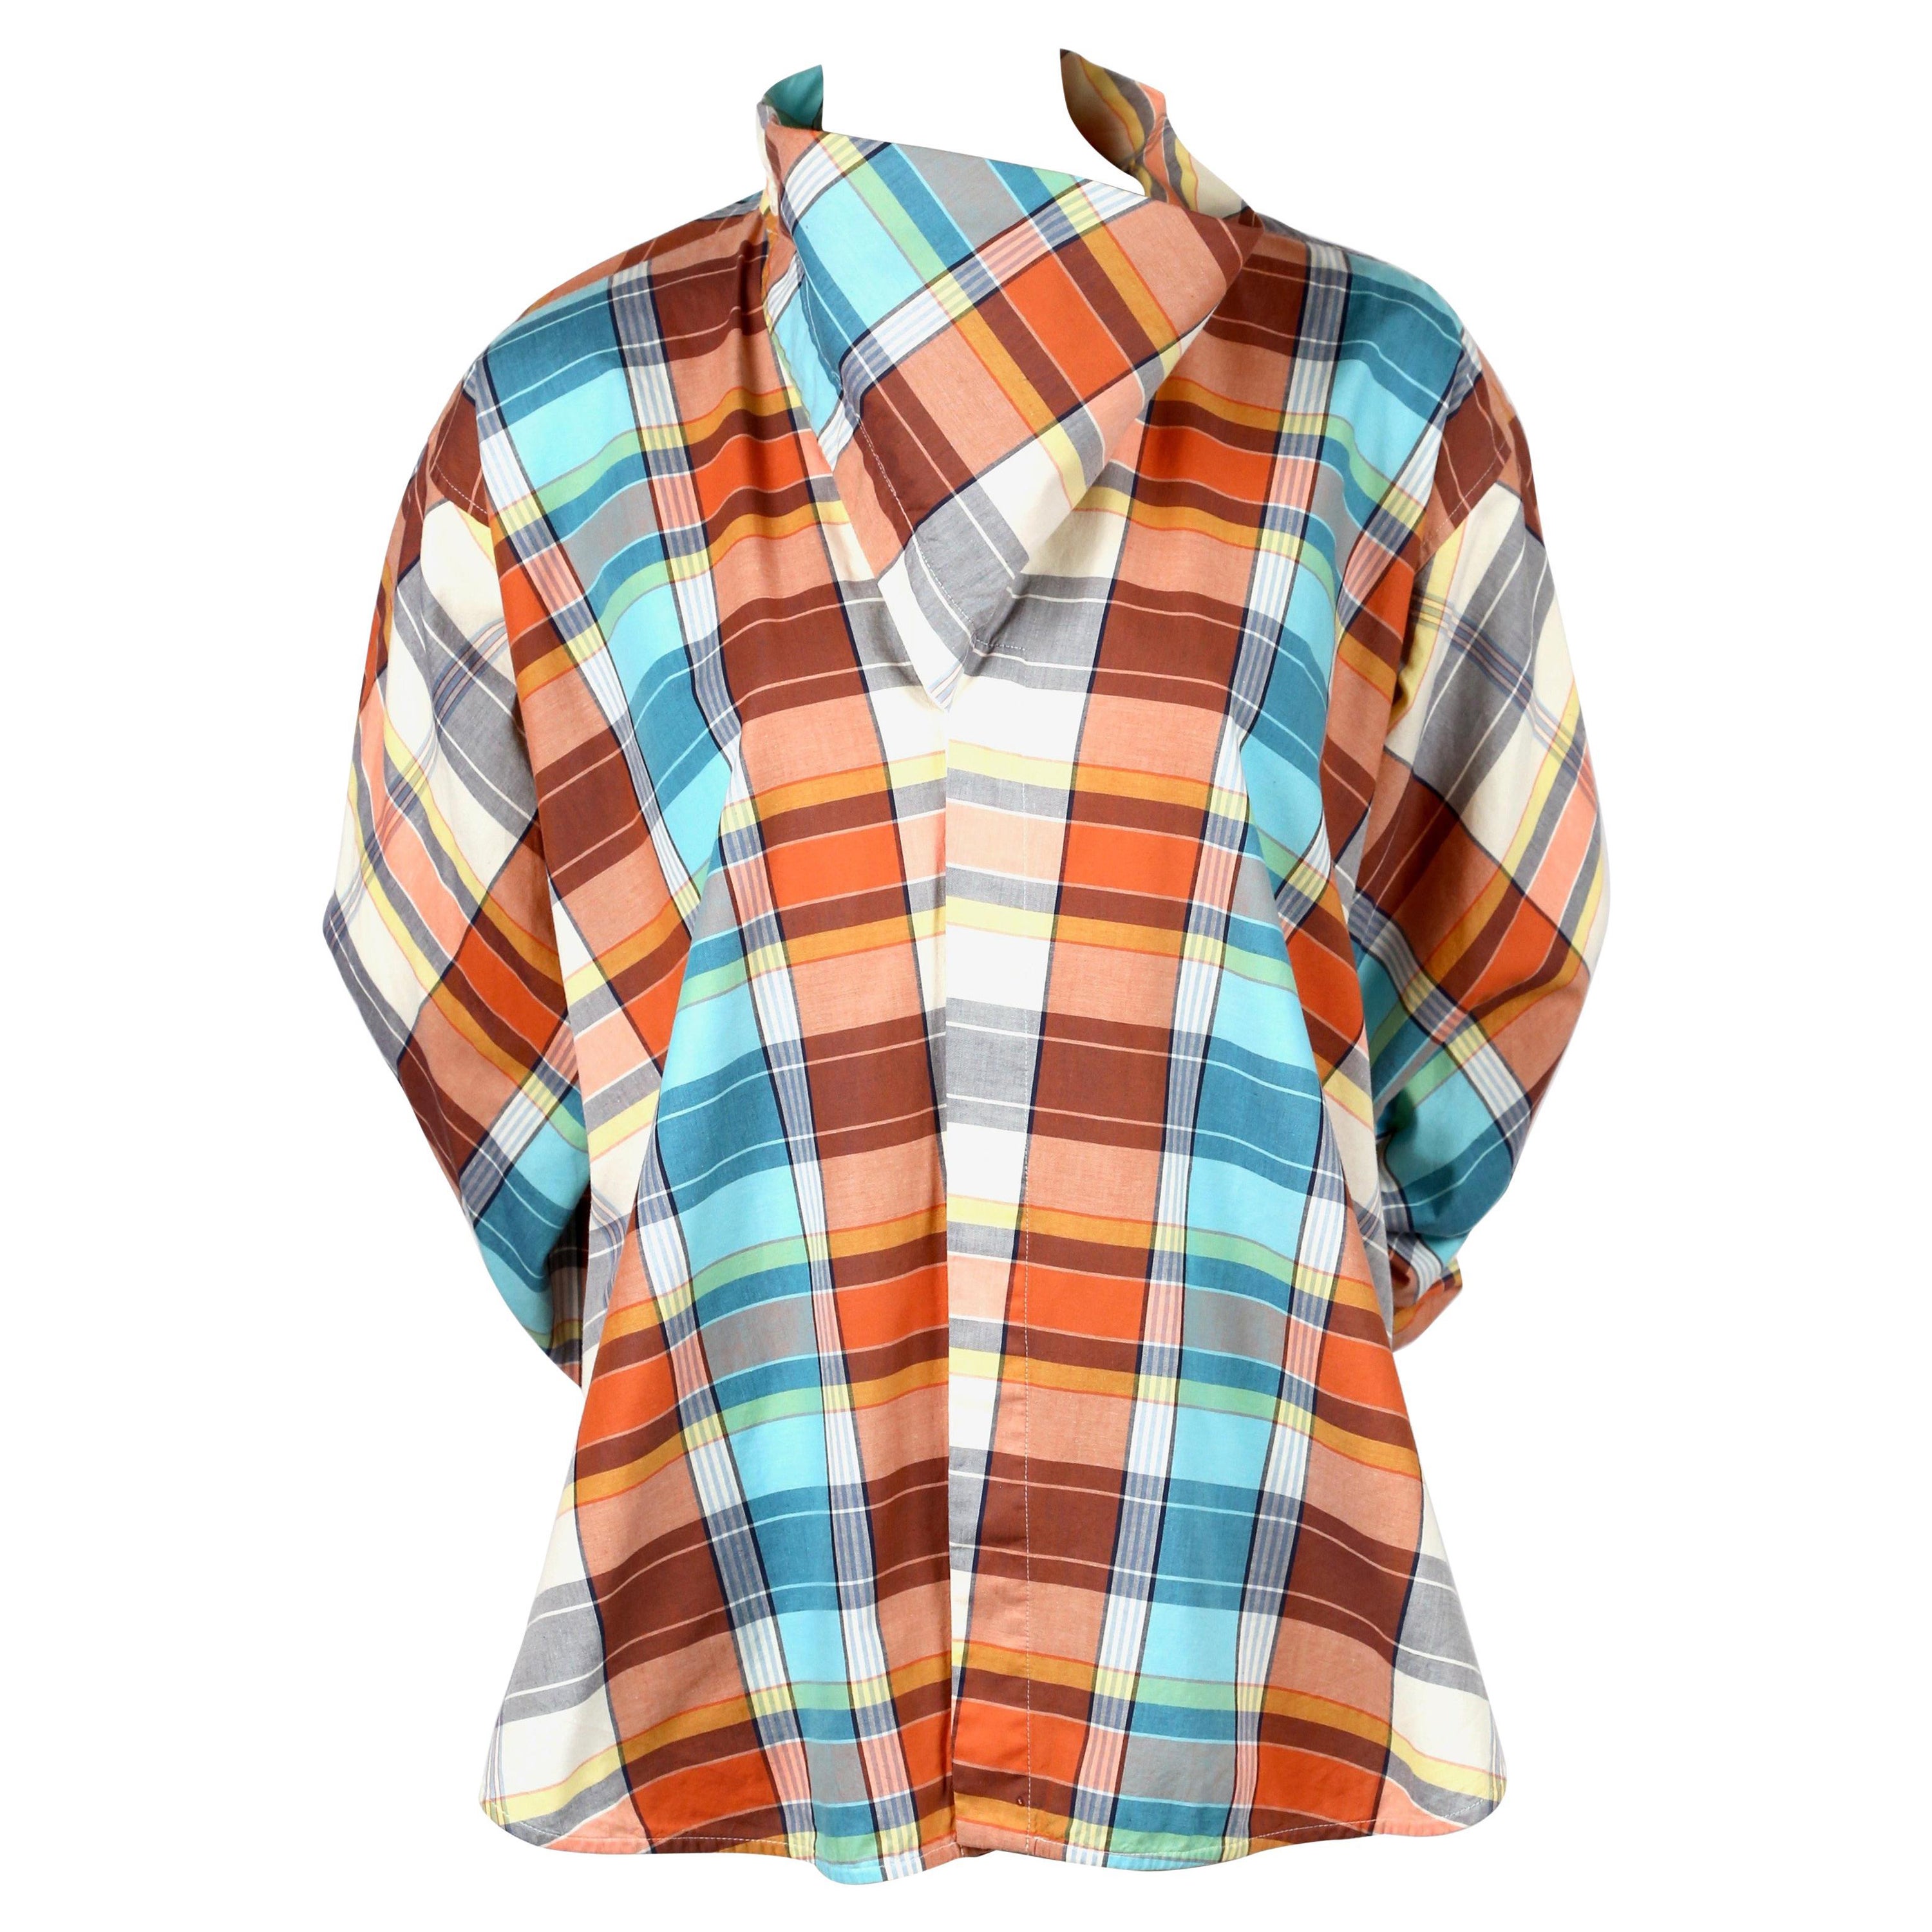 NEW 2013 CELINE by PHOEBE PHILO plaid cotton runway top with draped neck For Sale